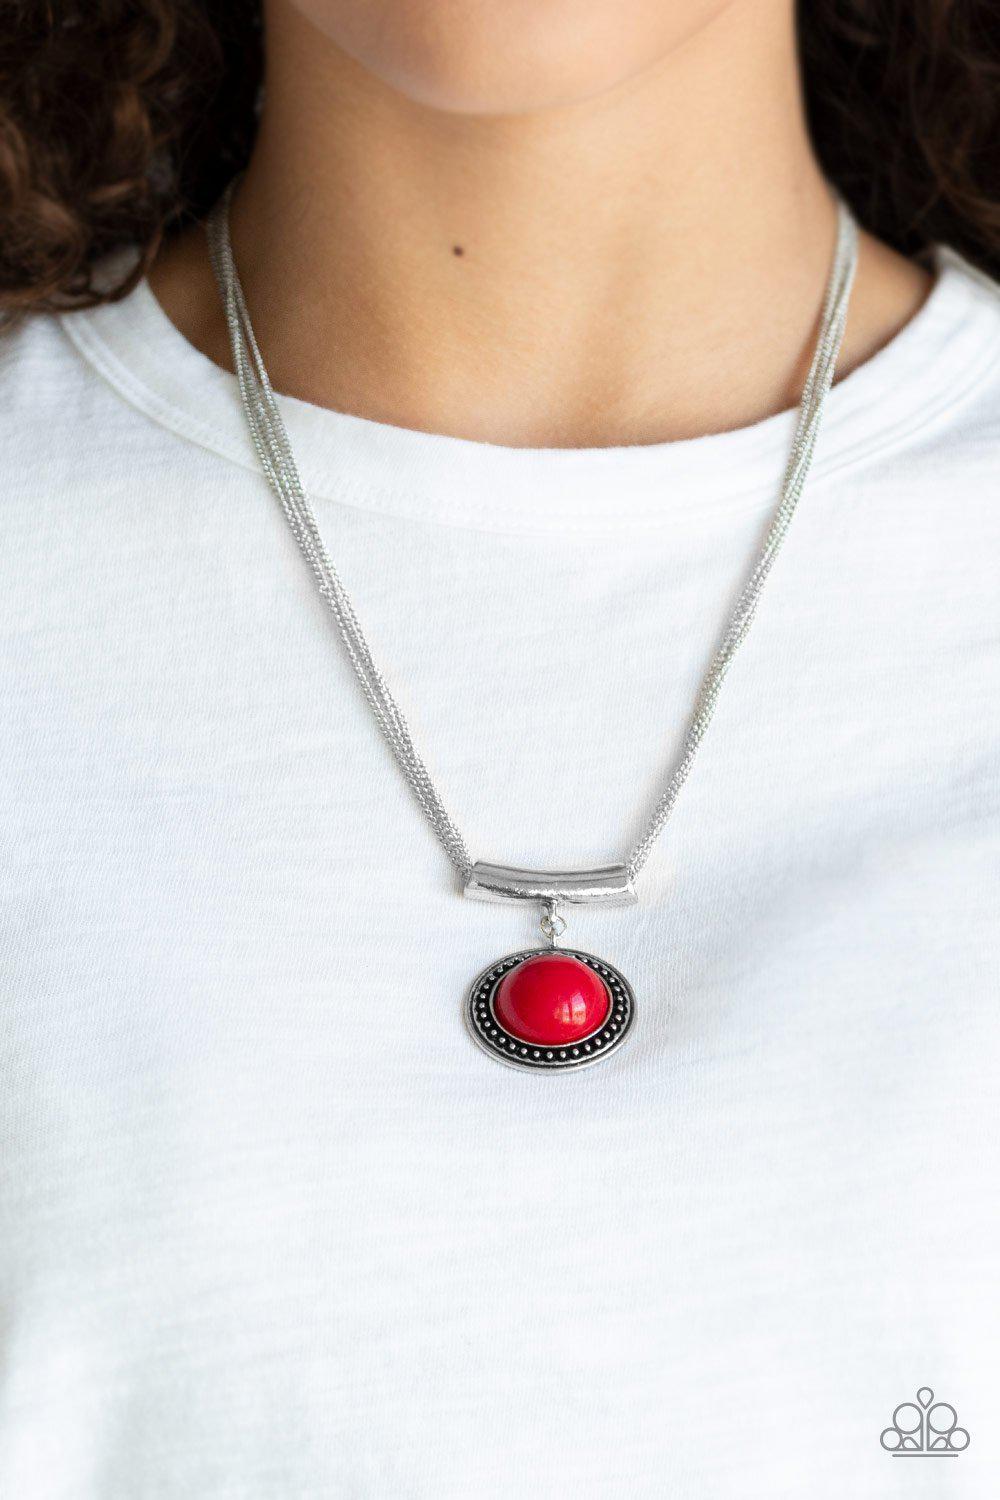 Gypsy Gulf Red and Silver Necklace - Paparazzi Accessories-CarasShop.com - $5 Jewelry by Cara Jewels